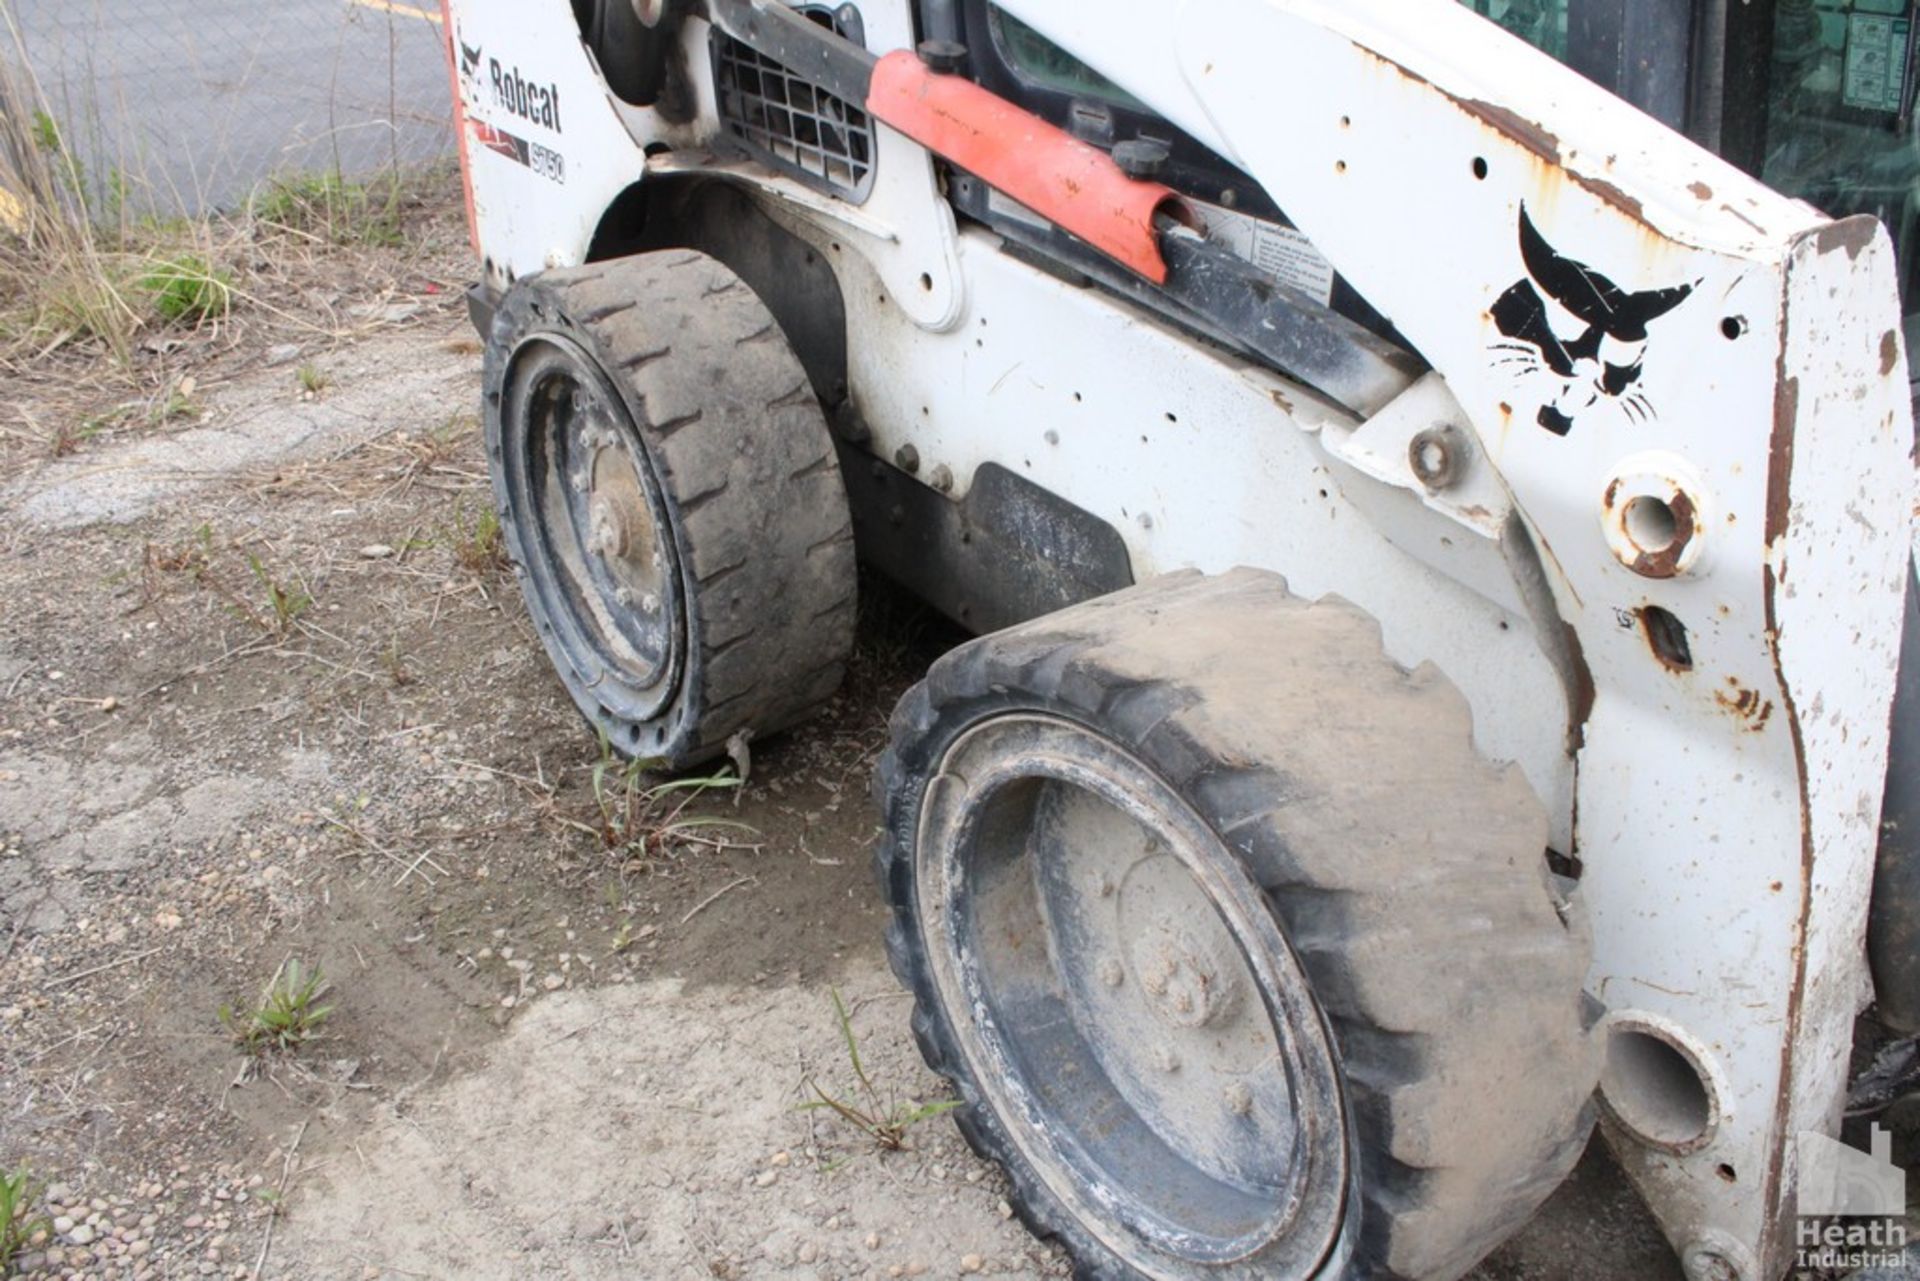 BOBCAT S750 SKID LOADER, 5,371 HOURS ON METER, SOLID TIRES, TRI-PIPE AUXILLARY HYDRAULICS, HYDRAULI - Image 6 of 8